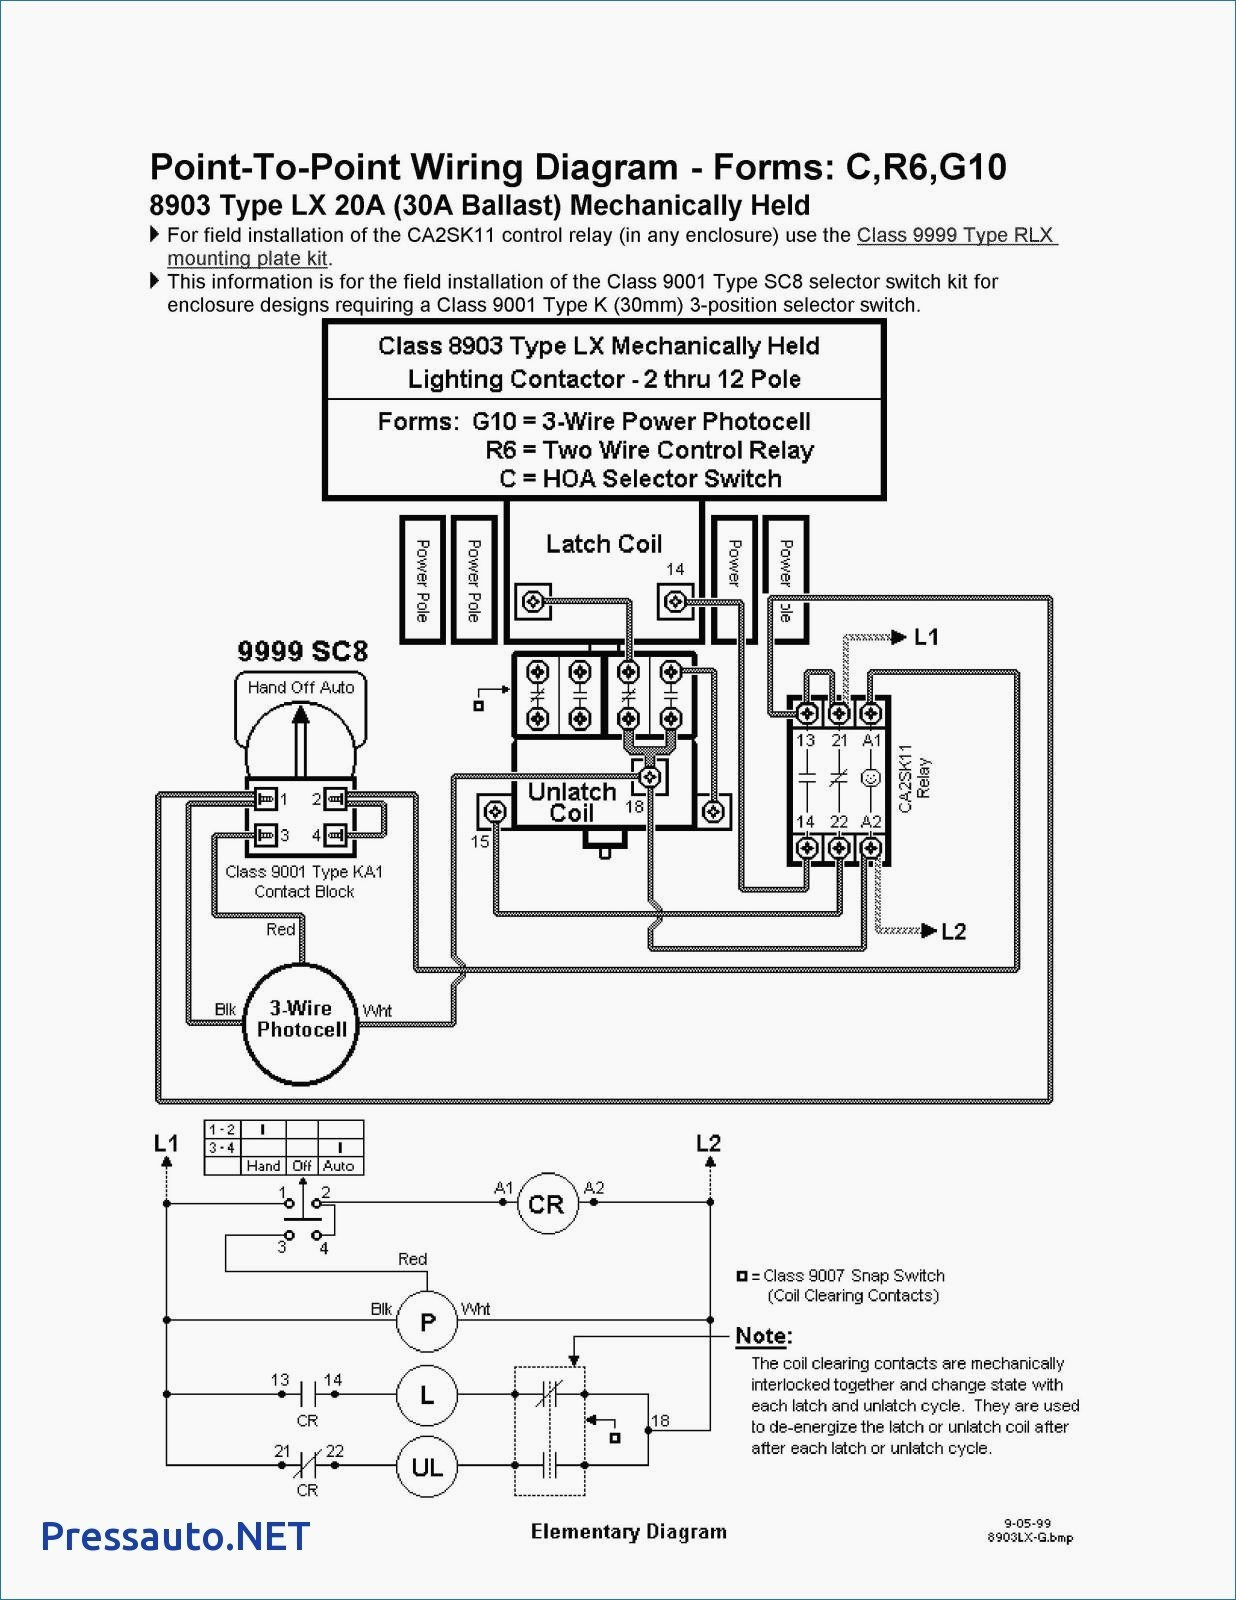 Square D Lighting Contactor Wiring Diagram 8903 - Trusted Wiring - Square D 8903 Lighting Contactor Wiring Diagram